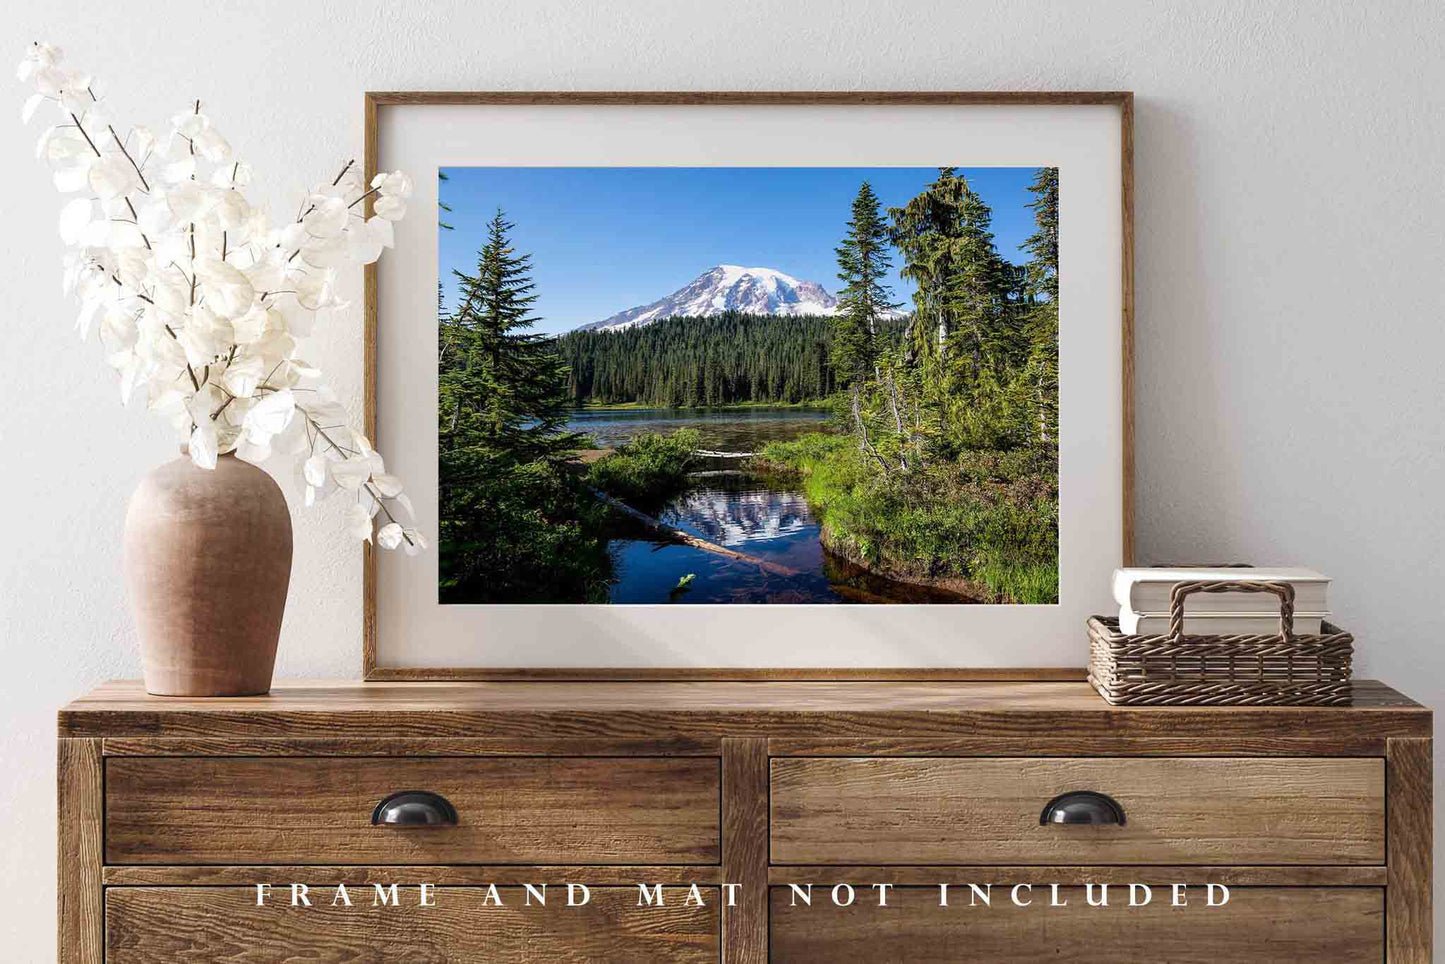 Pacific Northwest Photography Print - Picture of Mount Rainier at Reflection Lake in Washington - Cascade Mountains Photo Artwork